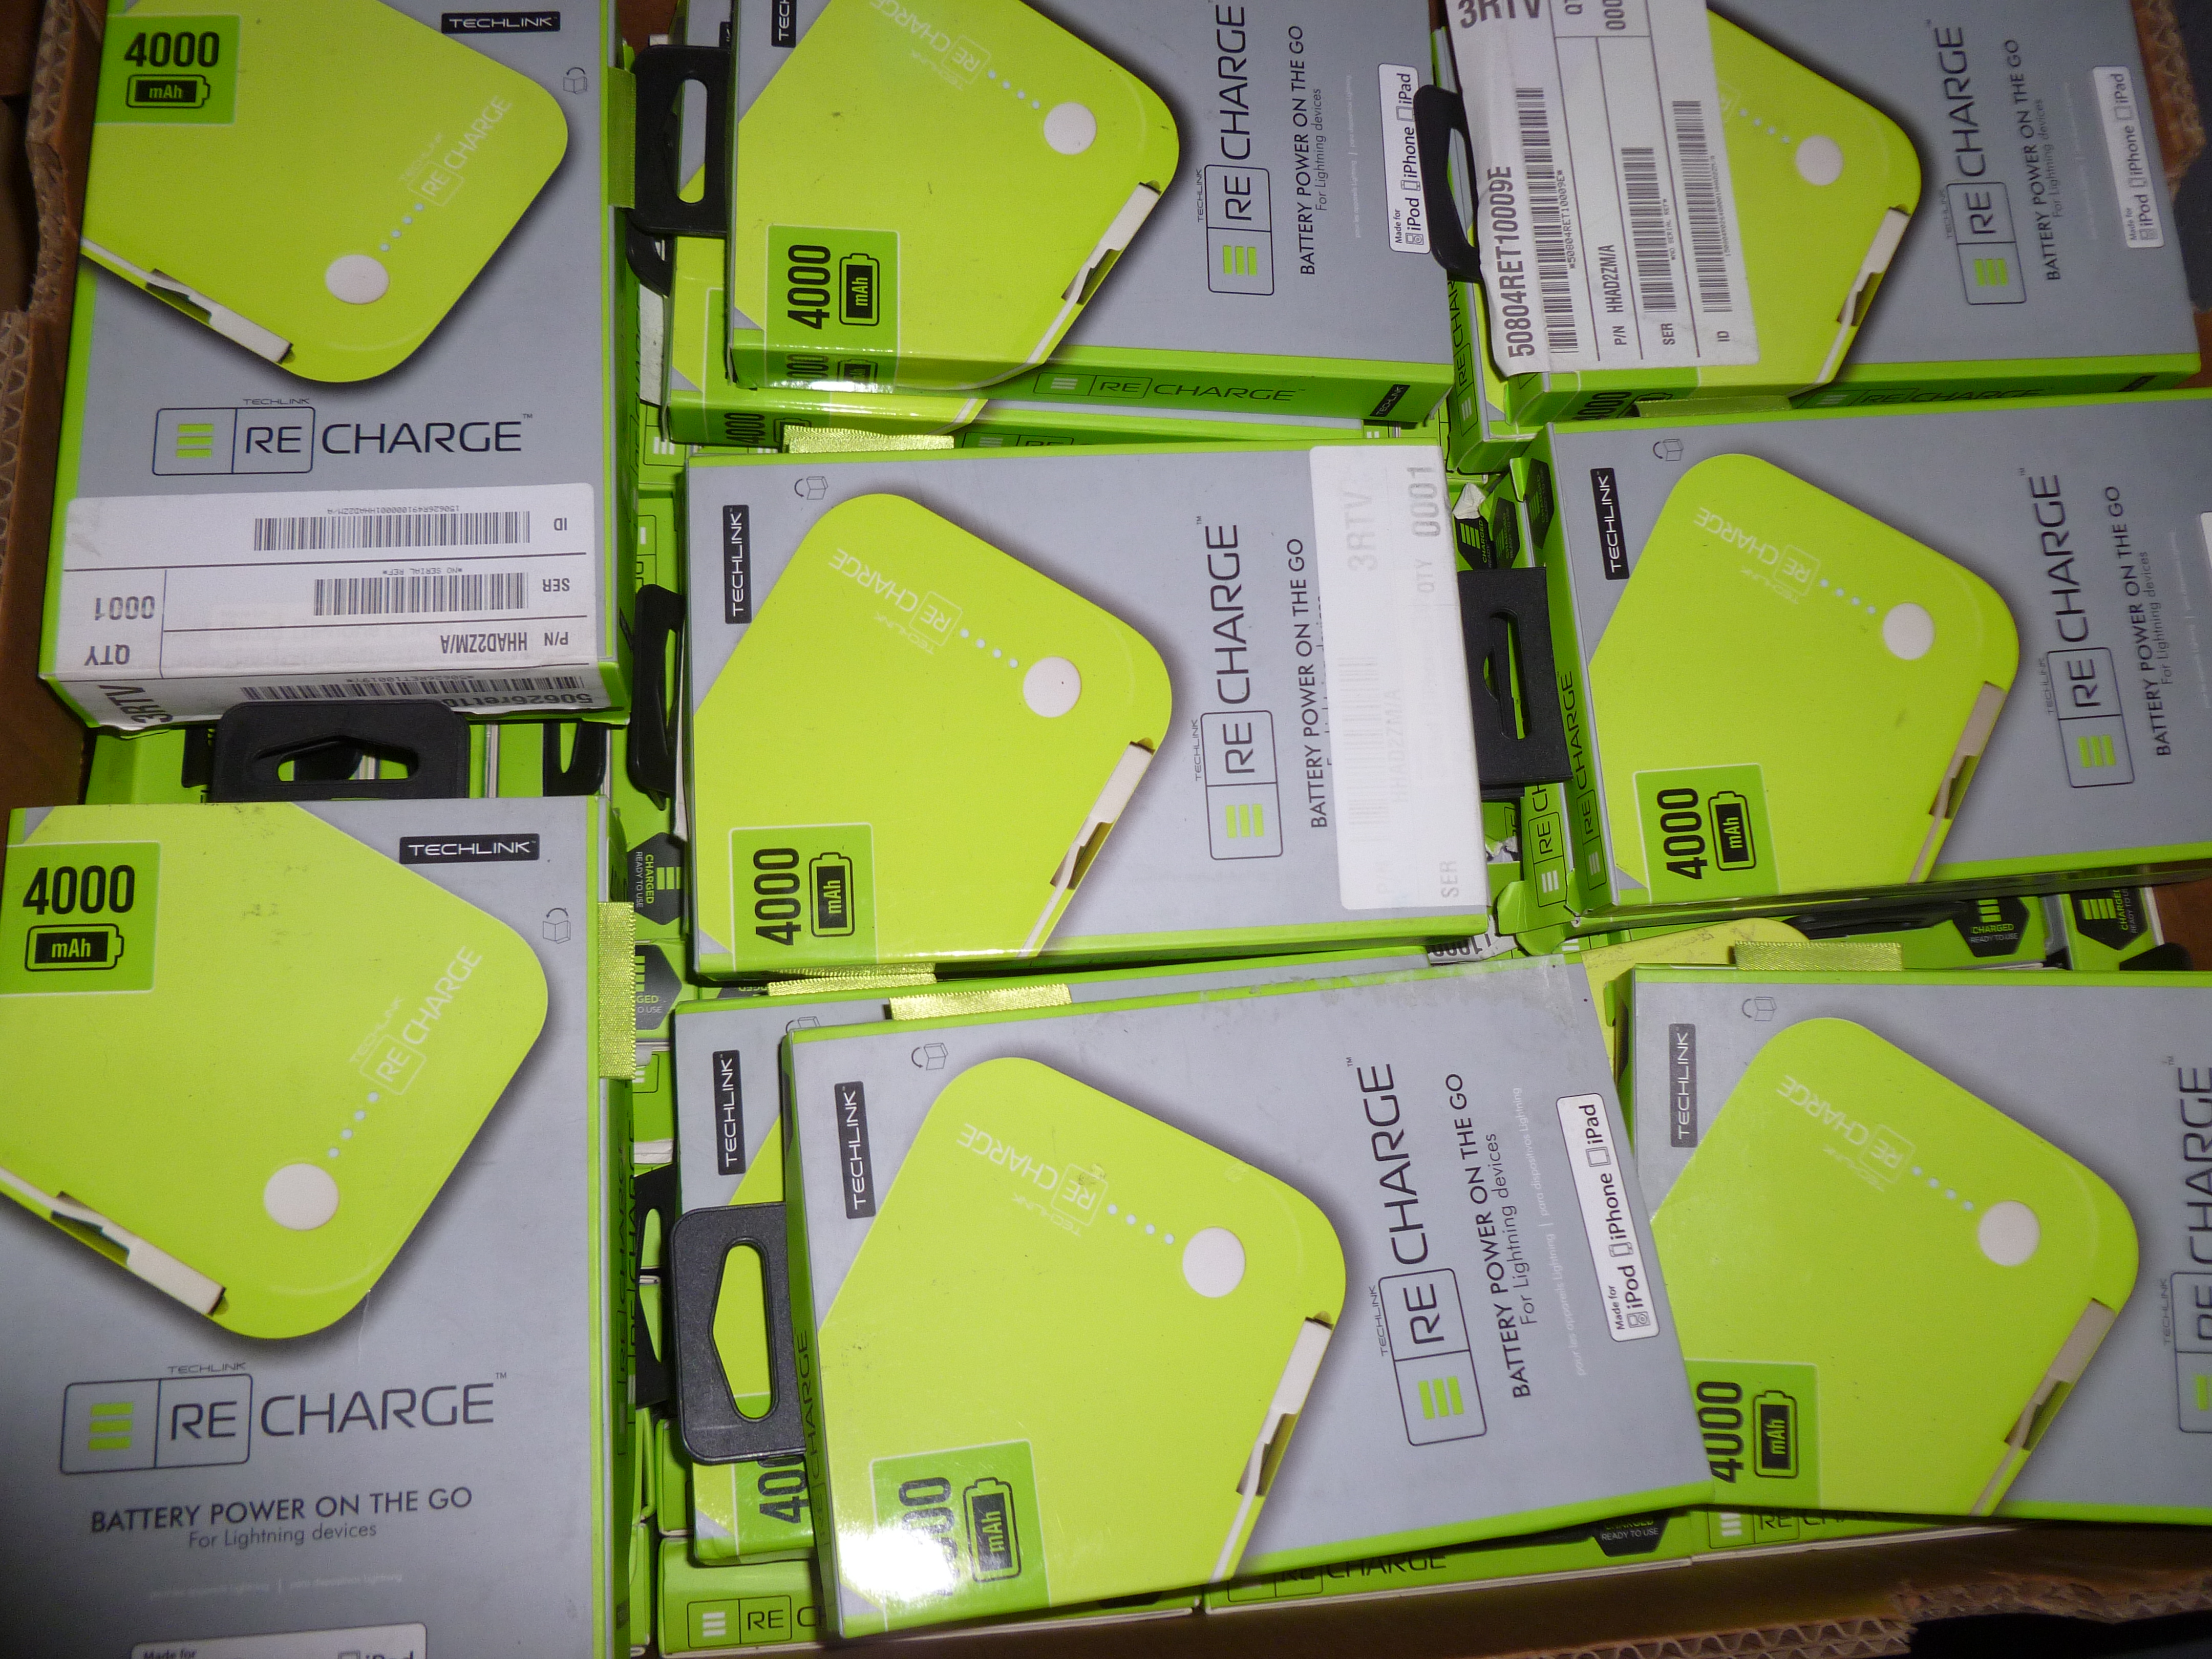 20 x Techlink Recharge 4000 Portable Pocket Power USB Charger Powerbank 4000mAh Lime Green Used